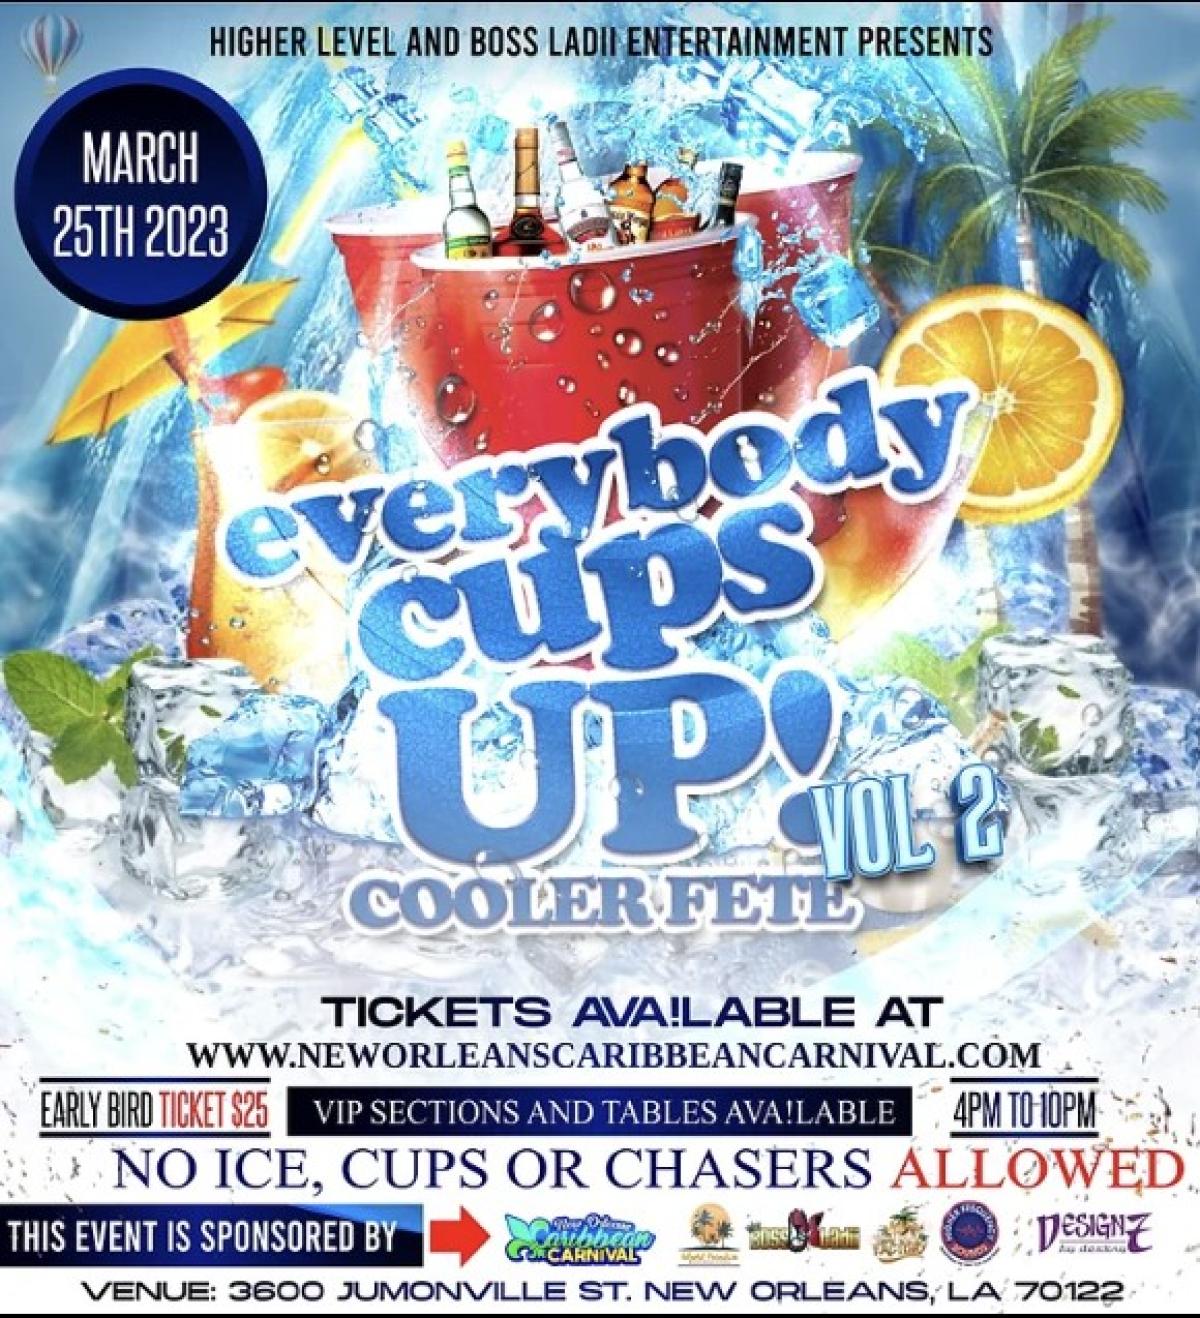 Everybody Cups Up! Cooler Fete Vol. 2 flyer or graphic.